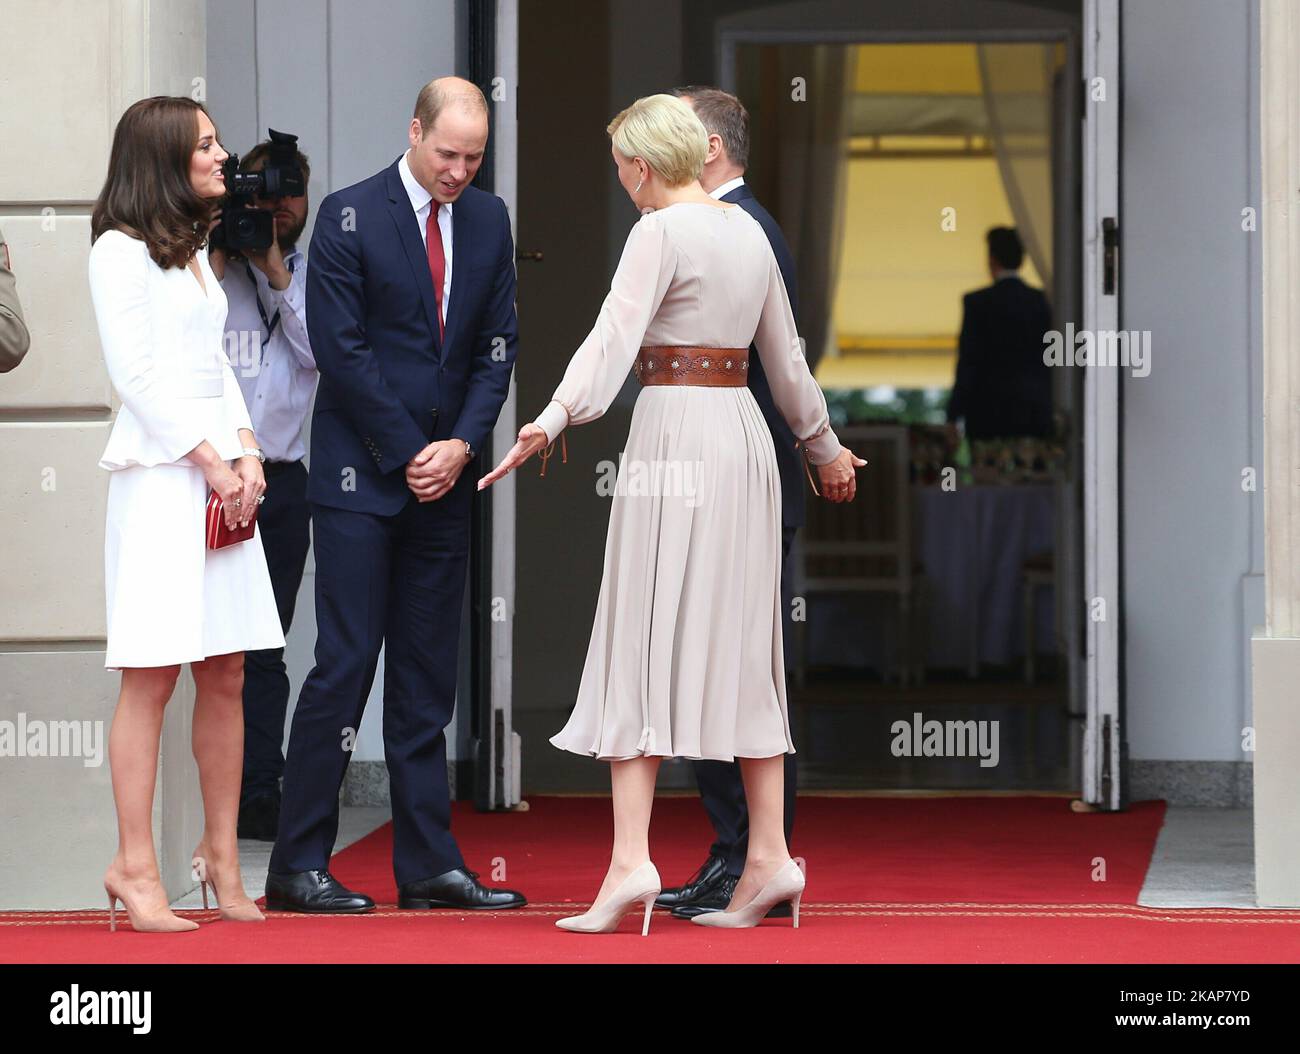 Welcoming of their Royal Highnesses The Duke of Cambridge (William Arthur Philip Louis), and Duchess of Cambridge (Catherine Elizabeth Middleton) in front of the Presidential Palace by the President of the Republic of Poland Andrzej Duda and First Lady Agata Kornhauser-Duda. July 17, 2017, Warsaw, Poland (Photo by Krystian Dobuszynski/NurPhoto) *** Please Use Credit from Credit Field *** Stock Photo